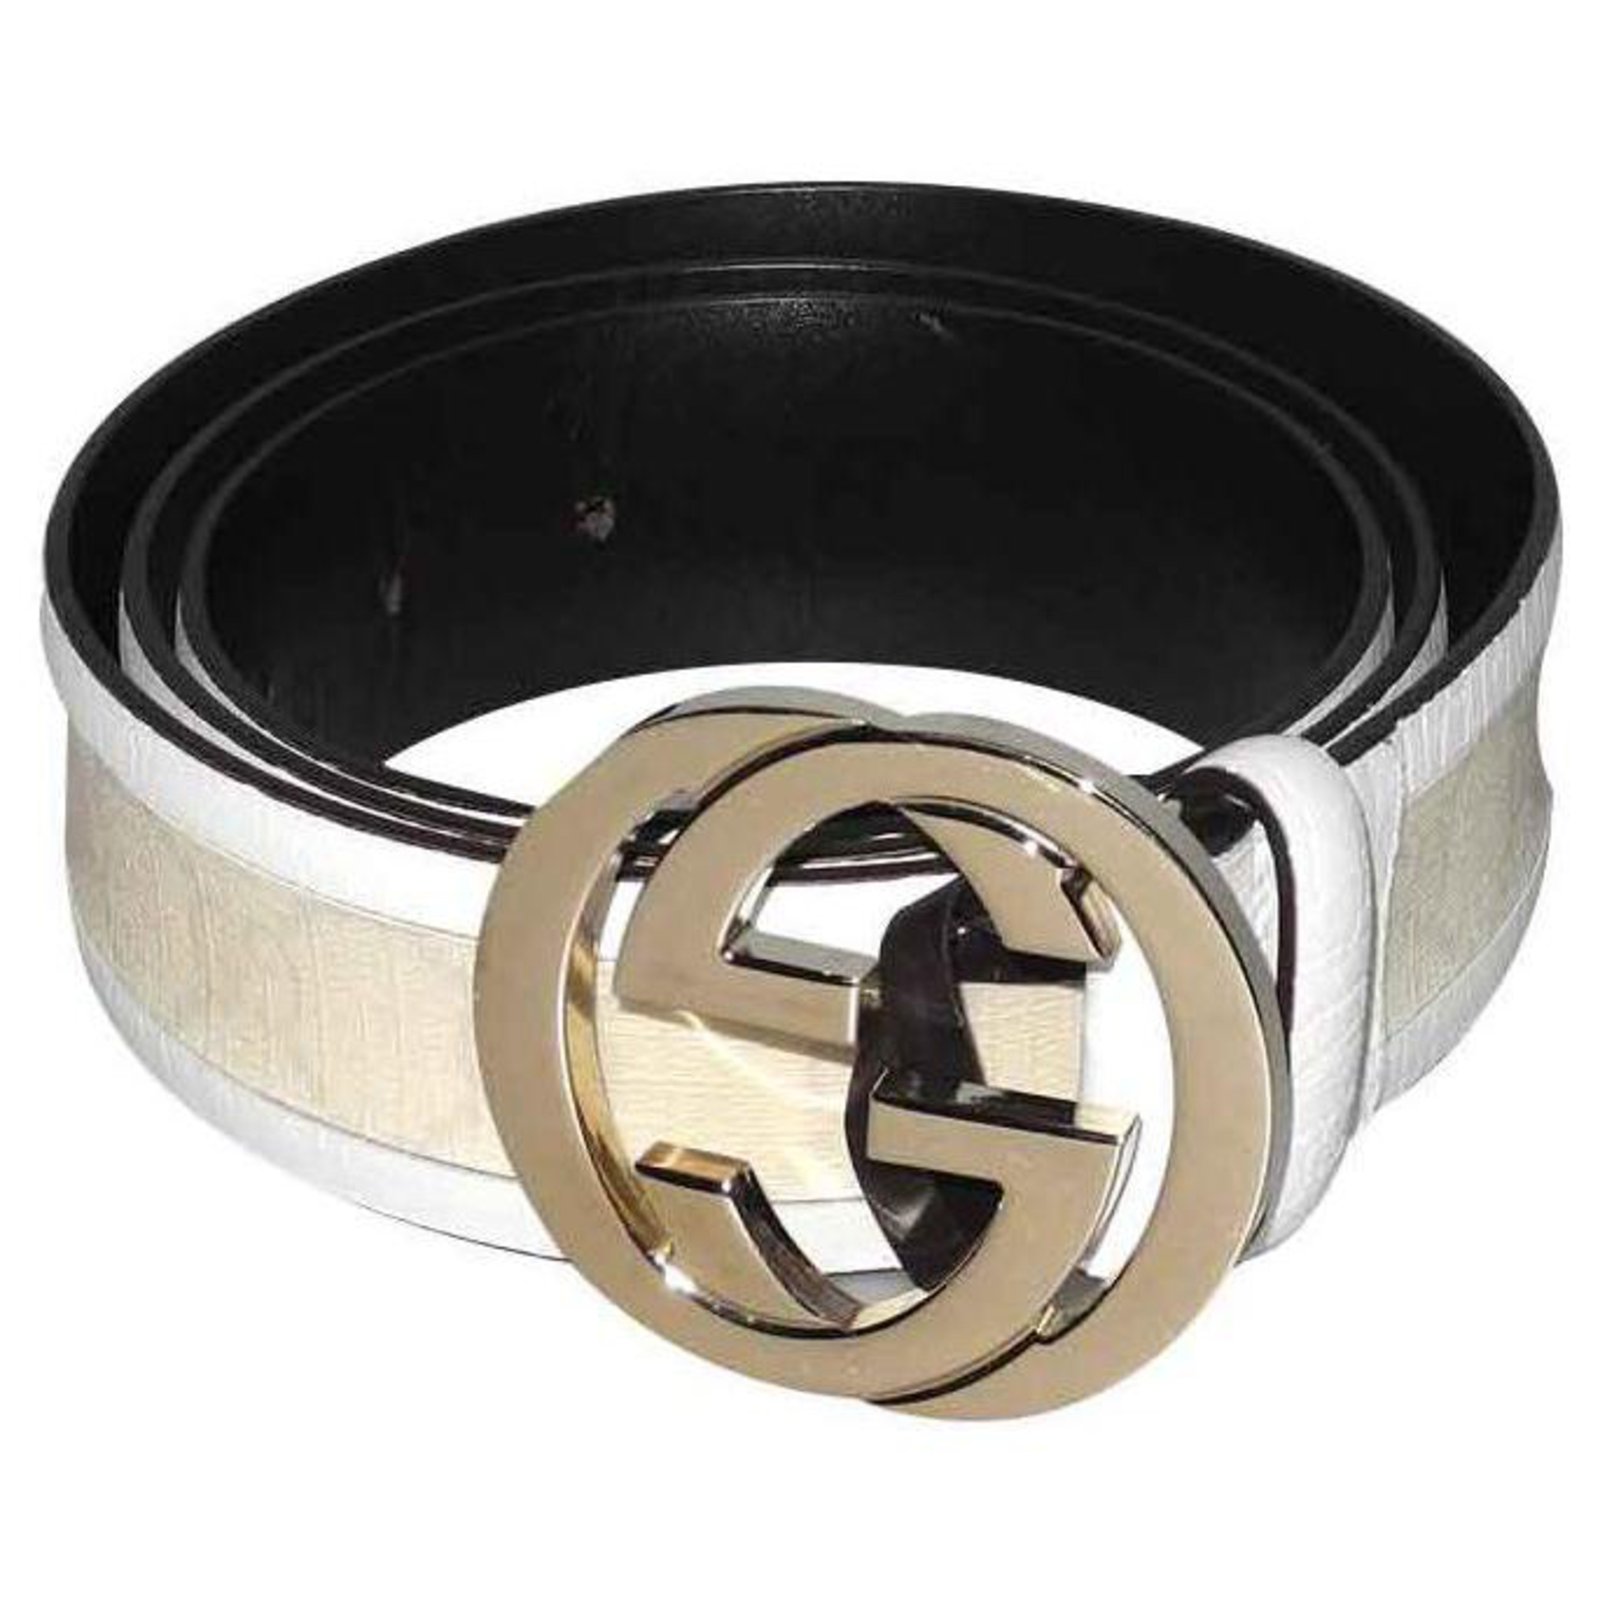 white gucci belt with silver buckle